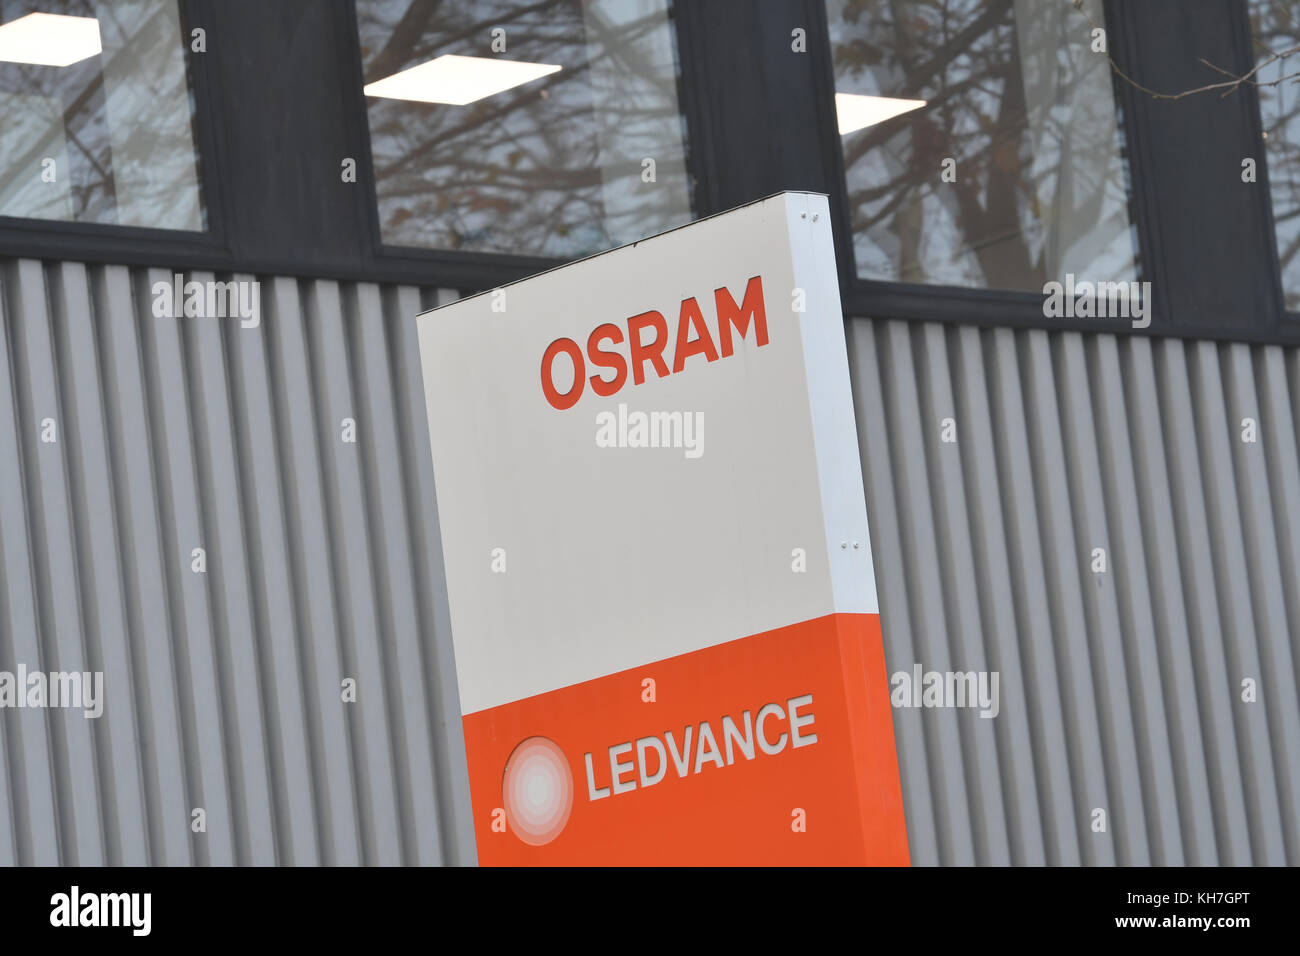 The logos 'Osram' and 'Ledvance' can be read on a board at the plant in Nonnendammallee, Berlin, Germany, 14 November 2017. The illuminant producer Ledvance is set to close down its plants in Berlin and Augsburg by the end of 2018. According to union information more than half of the workplaces in Germany are going to be cut. In march 2017 Osram sold its branch Ledvance, which was named in 2016, for more than 400 million euros to a consortium affiliated to the Chinese investor MLS. The company employs more than 9000 workers in 17 different locations around the globe. In Berlin 220 employees ar Stock Photo